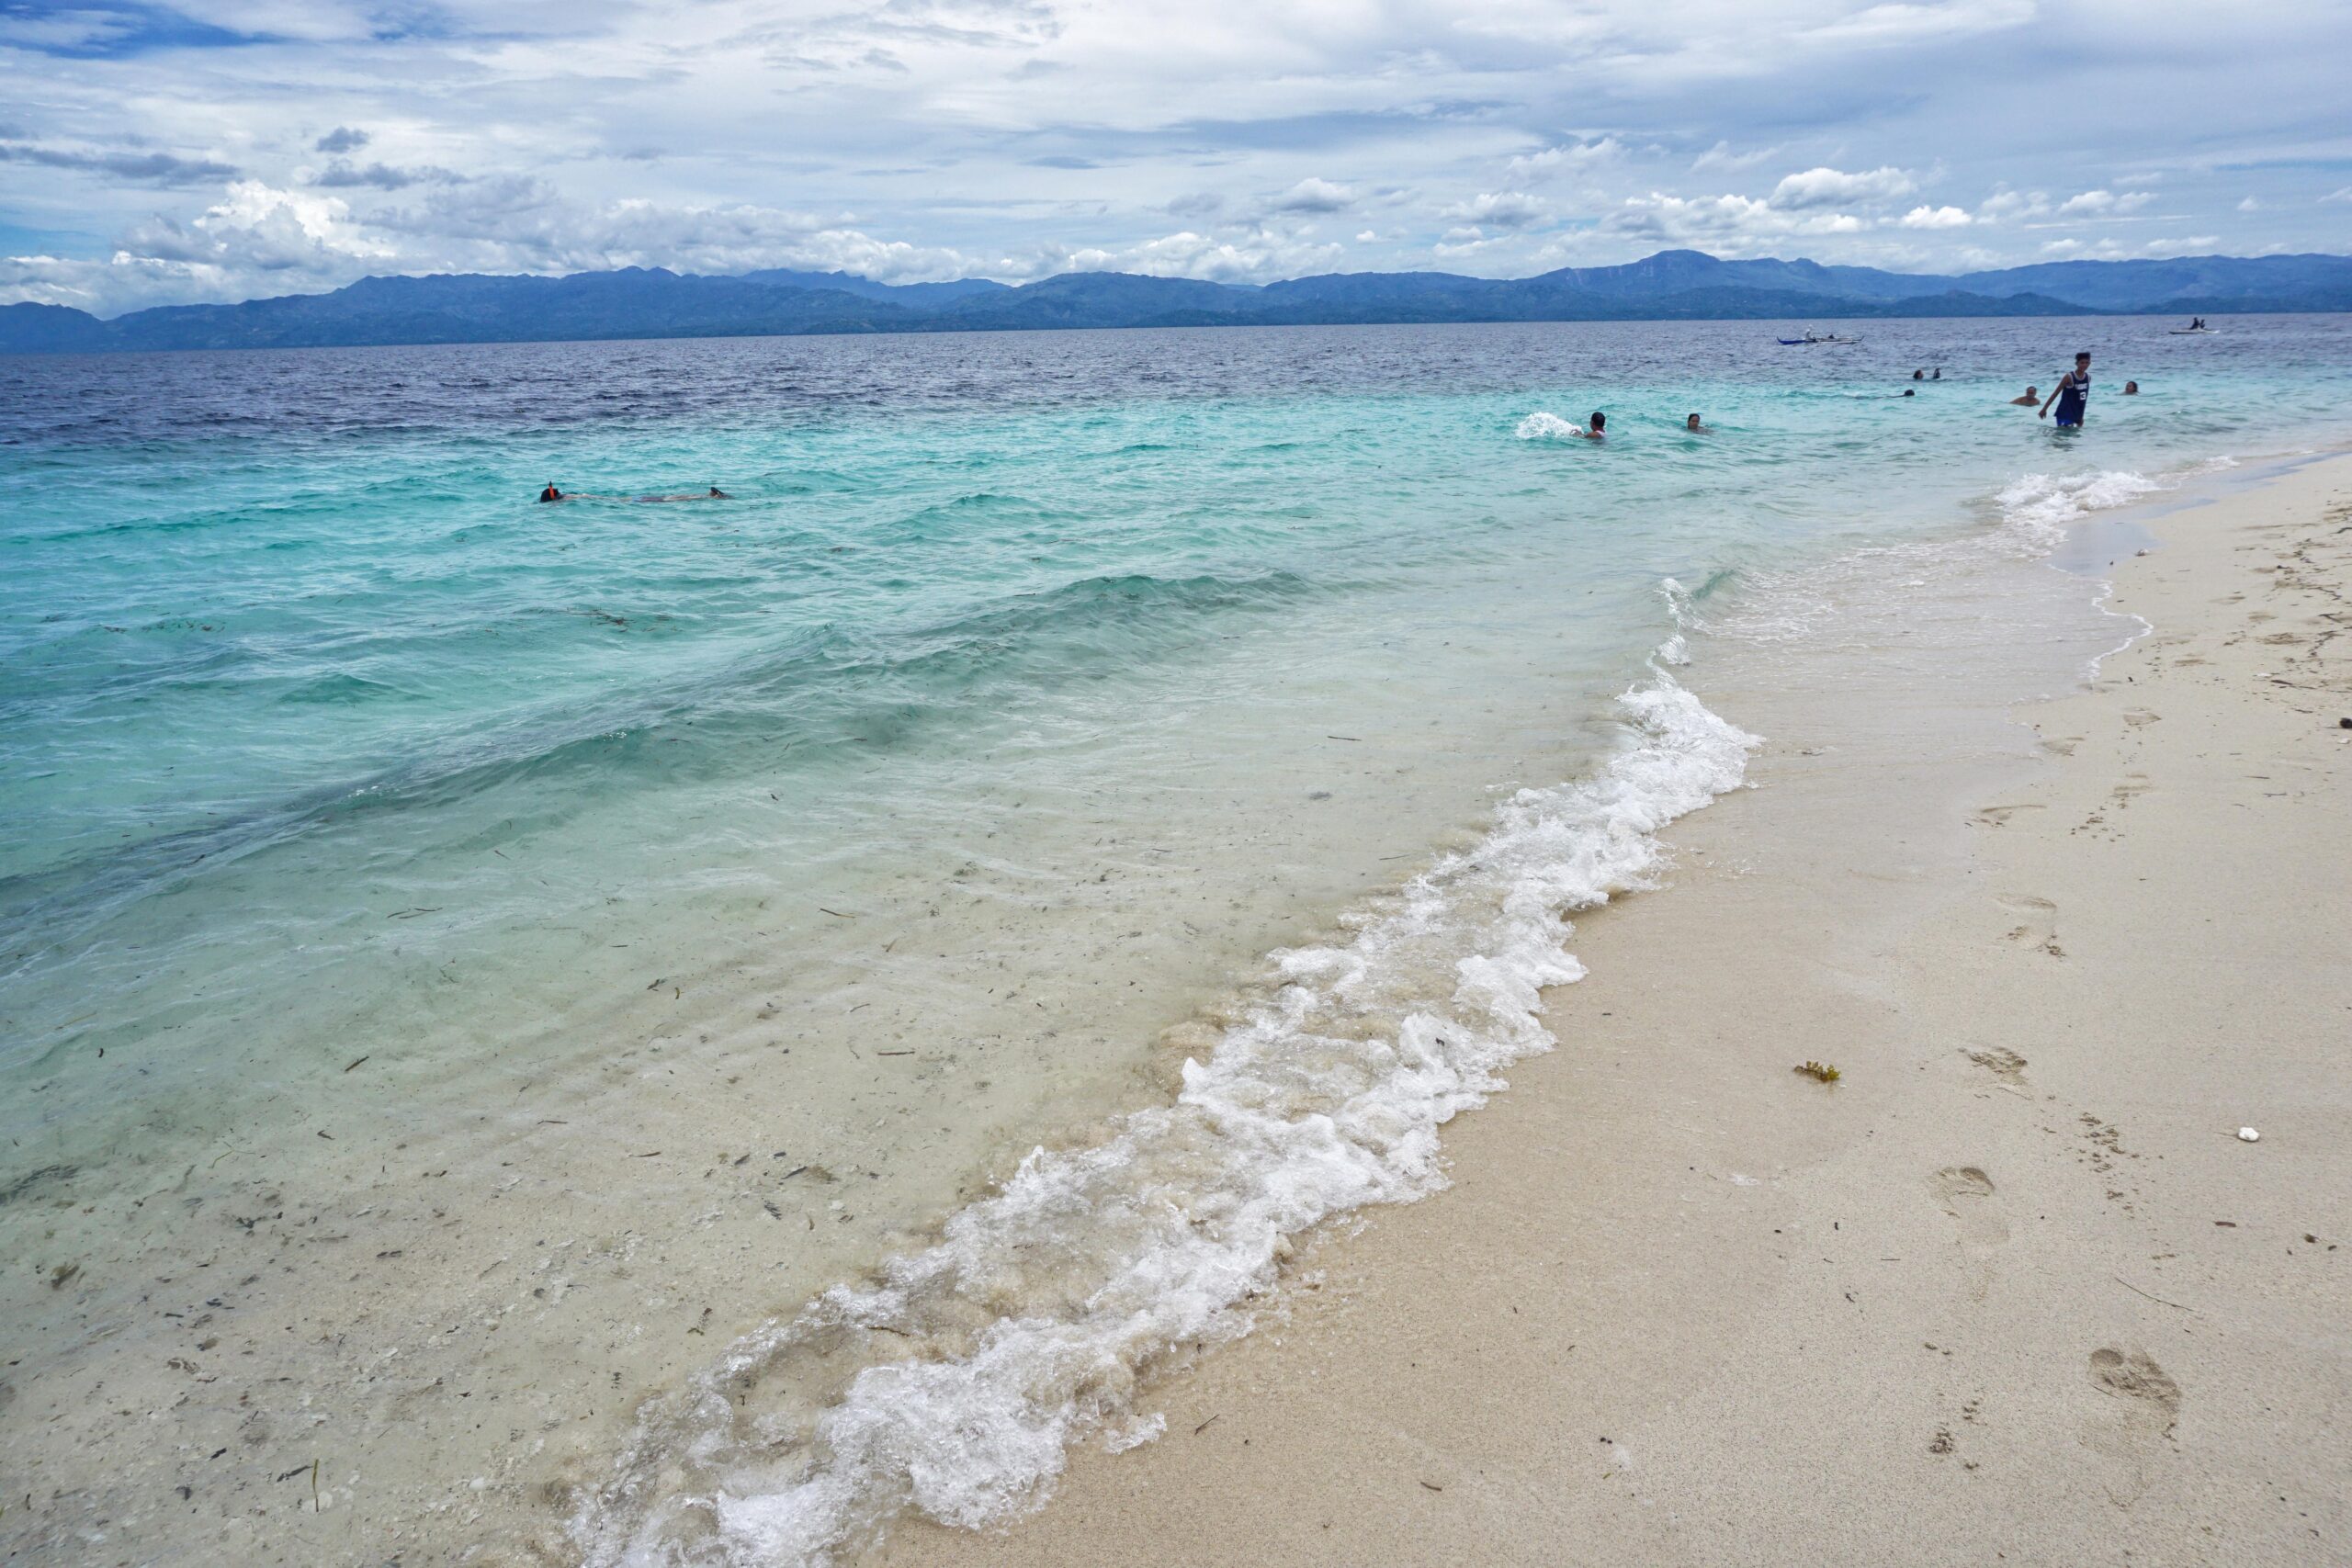 Banned: Entry to beaches in Cebu province